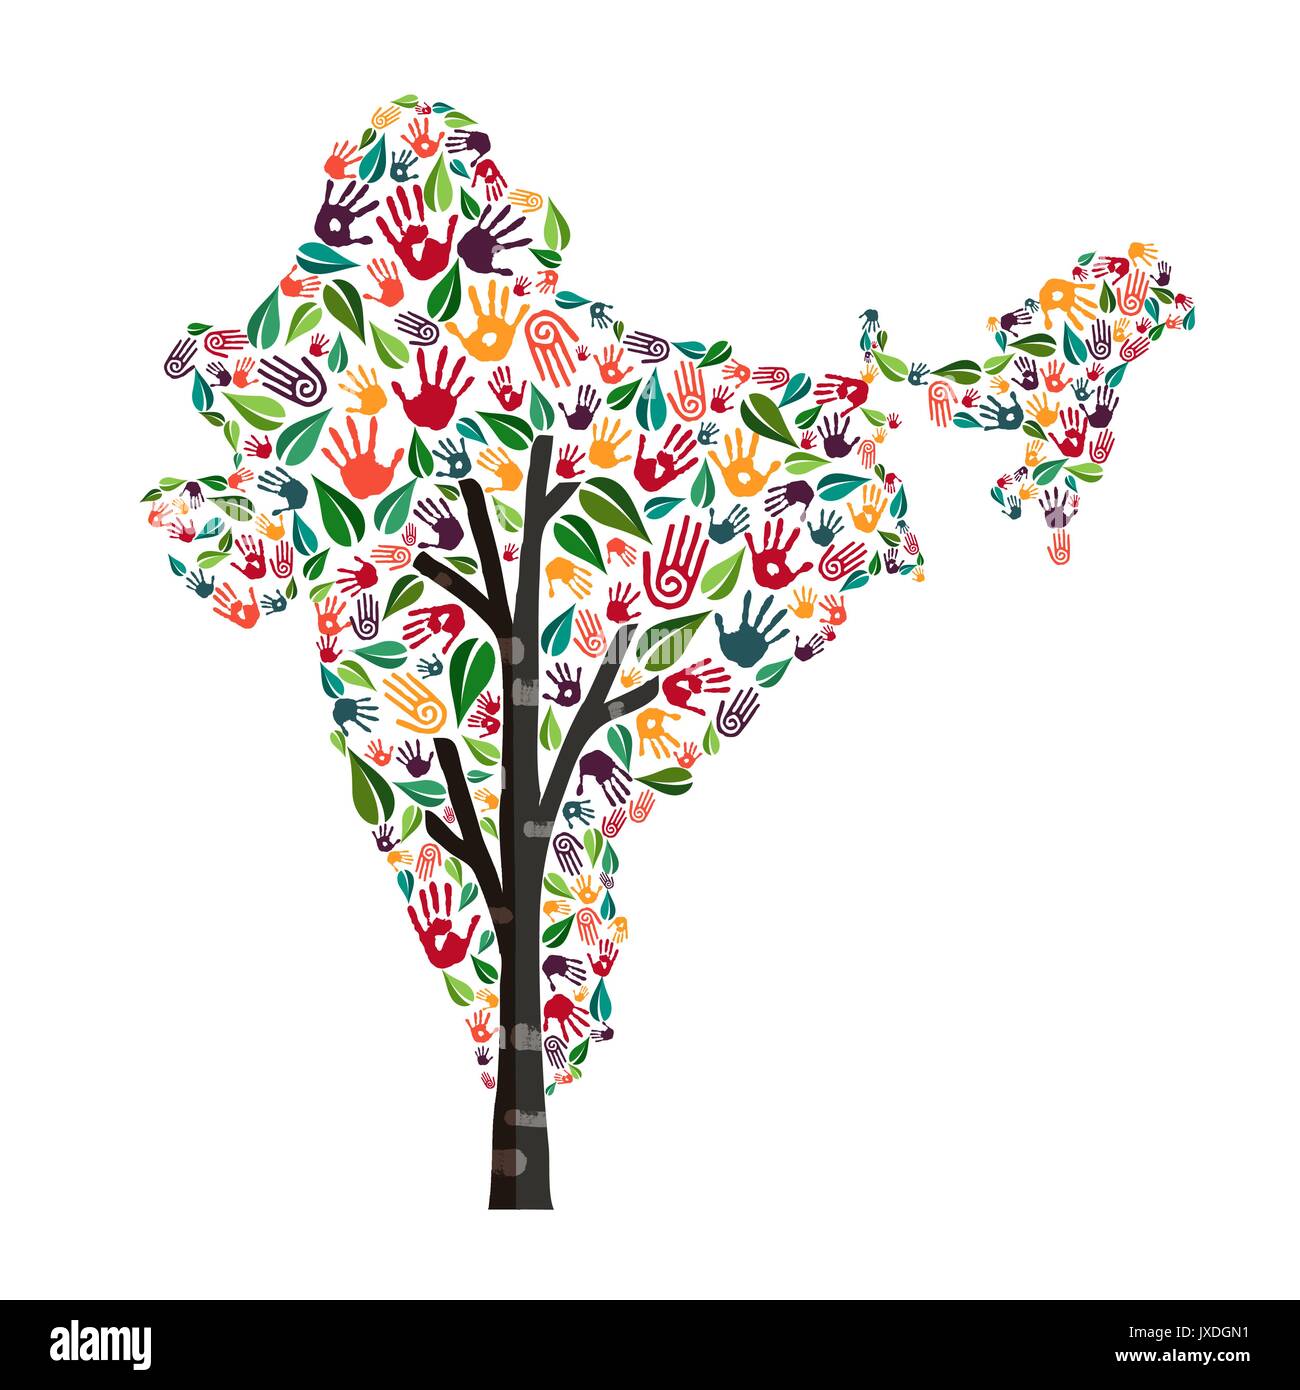 Tree with indian country shape and human hand prints. India world help concept illustration for charity work, environment care or social project. EPS1 Stock Vector